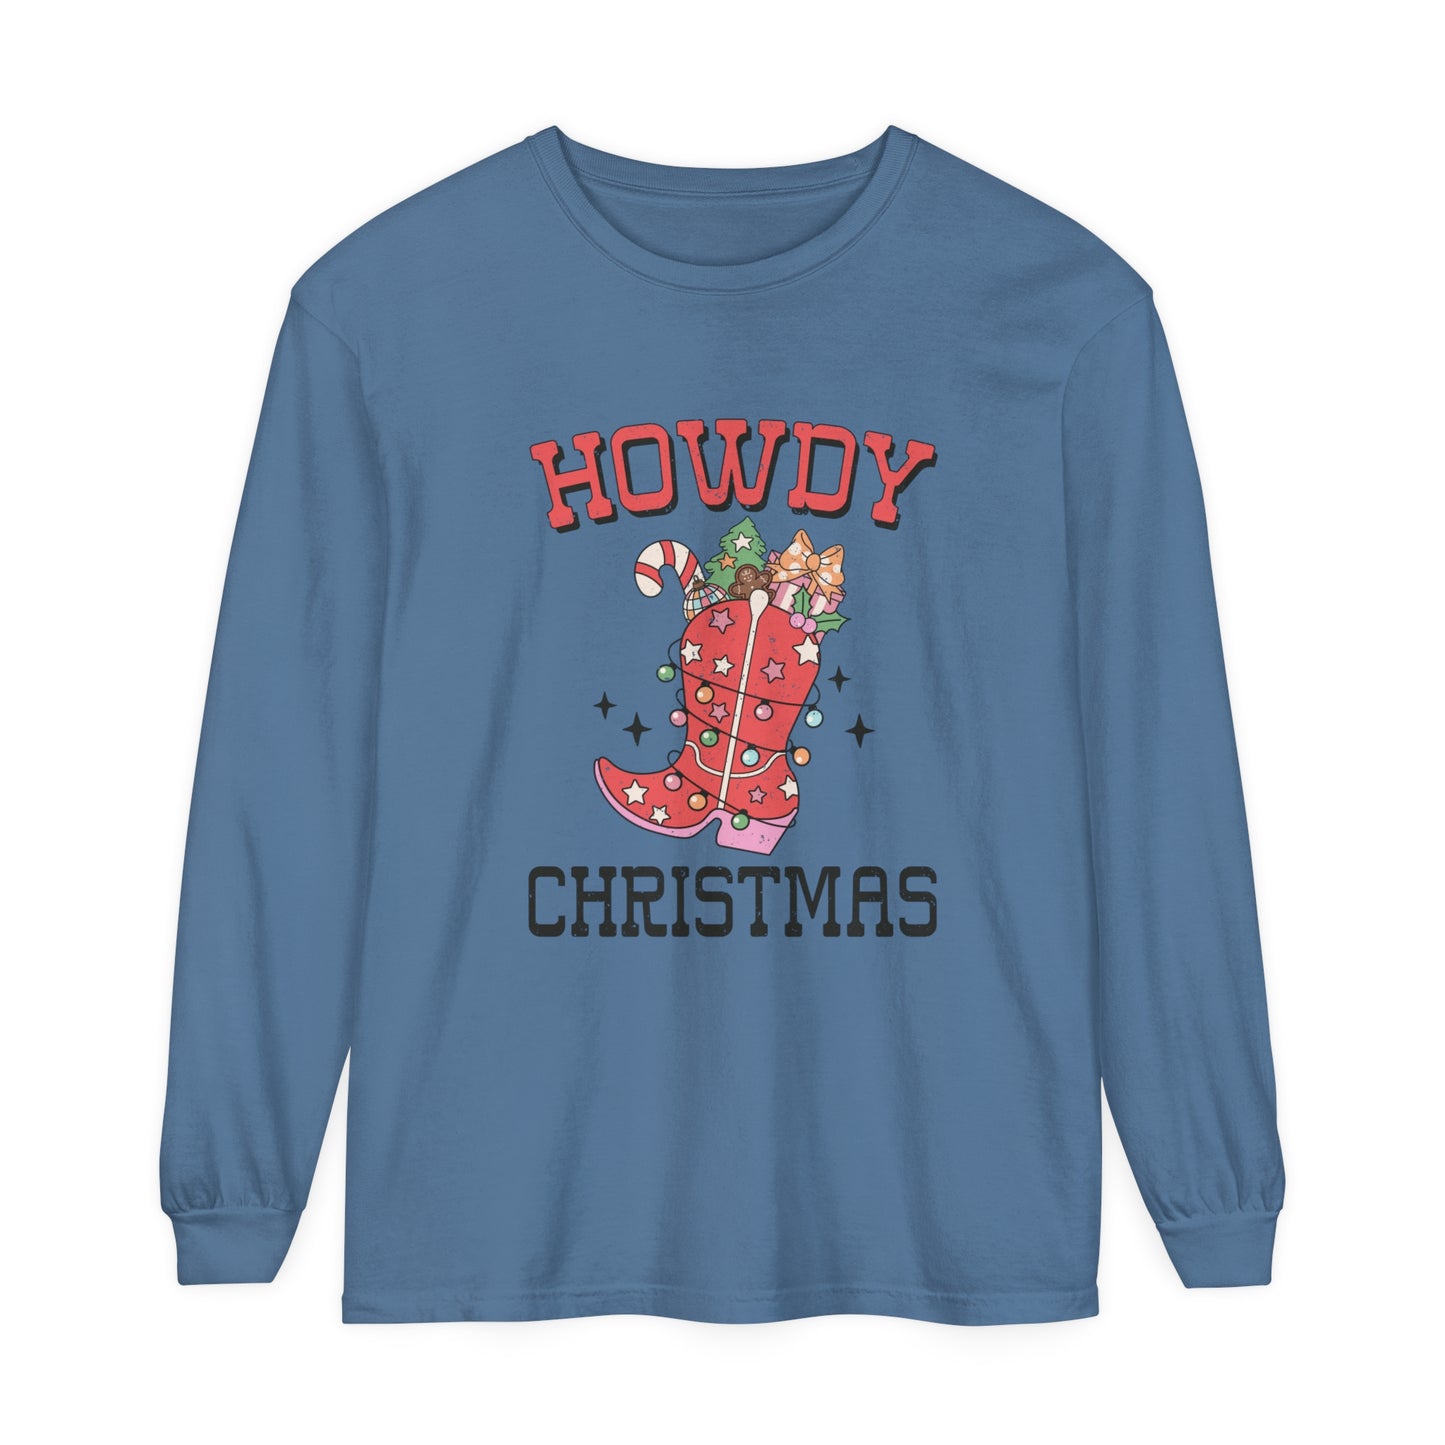 Howdy Christmas Women's Country Christmas Holiday Loose Long Sleeve T-Shirt